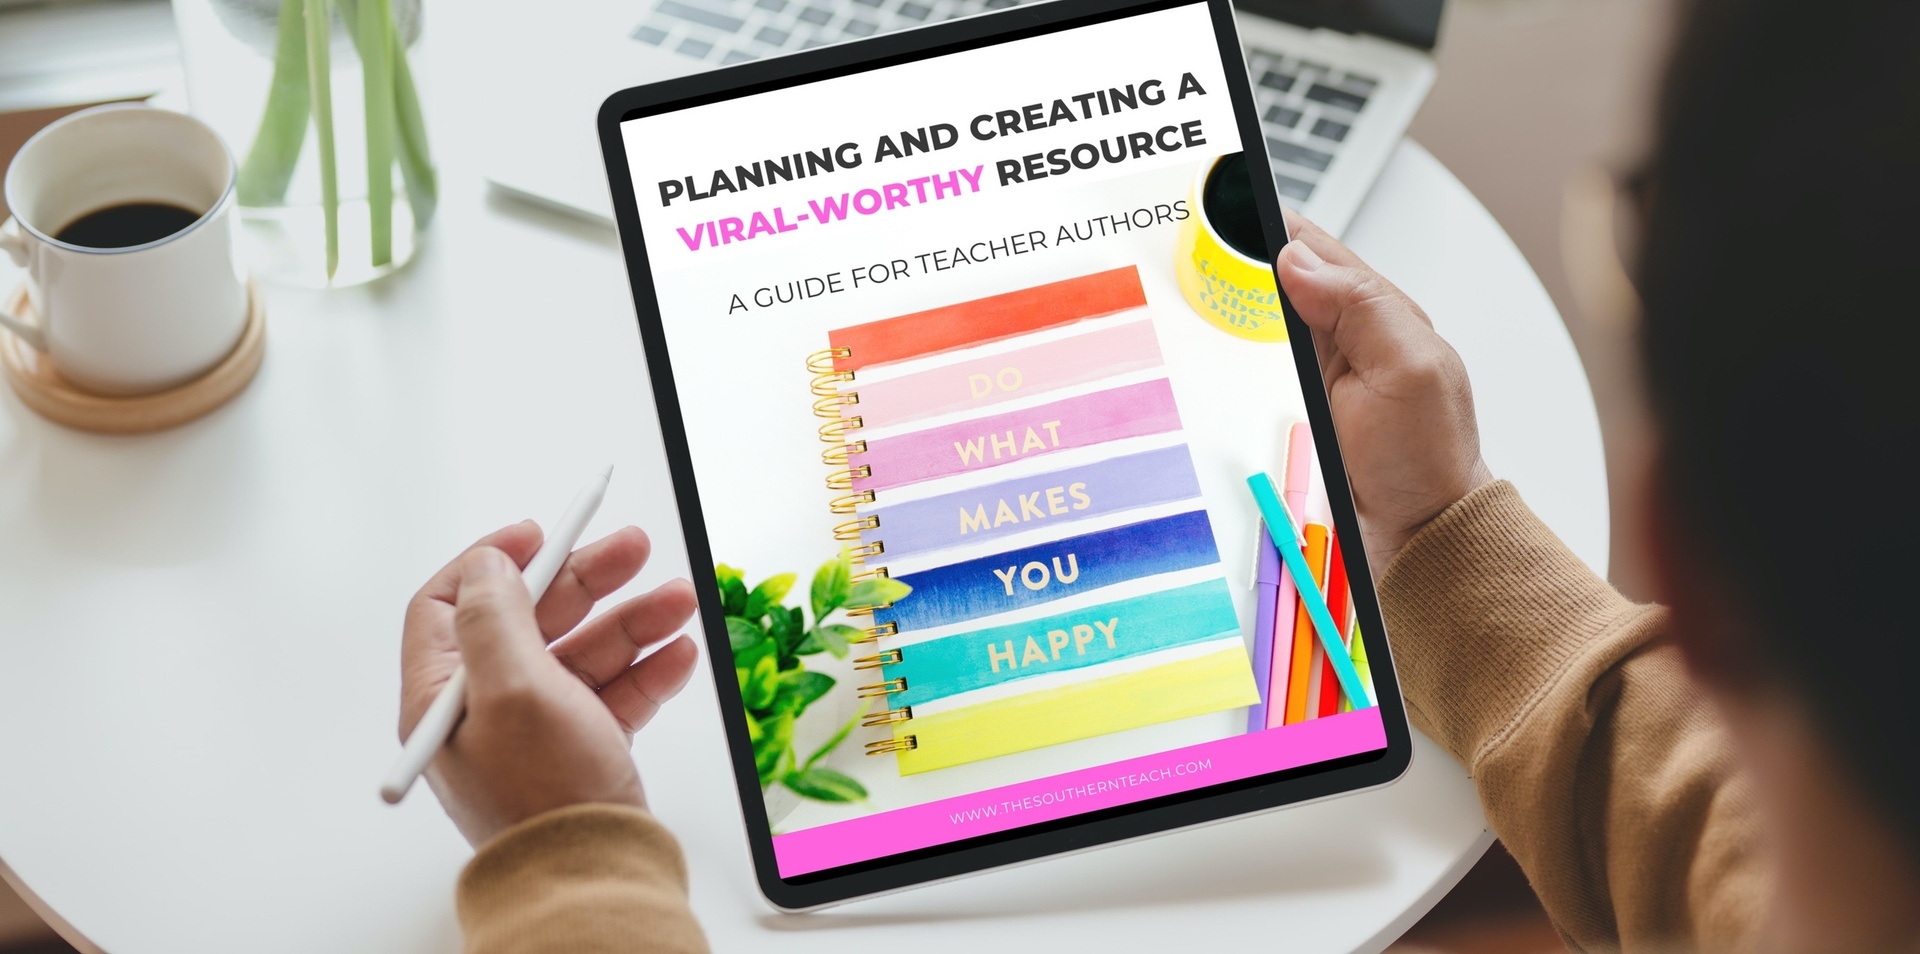 Plan and Create a Viral-Worthy Resource